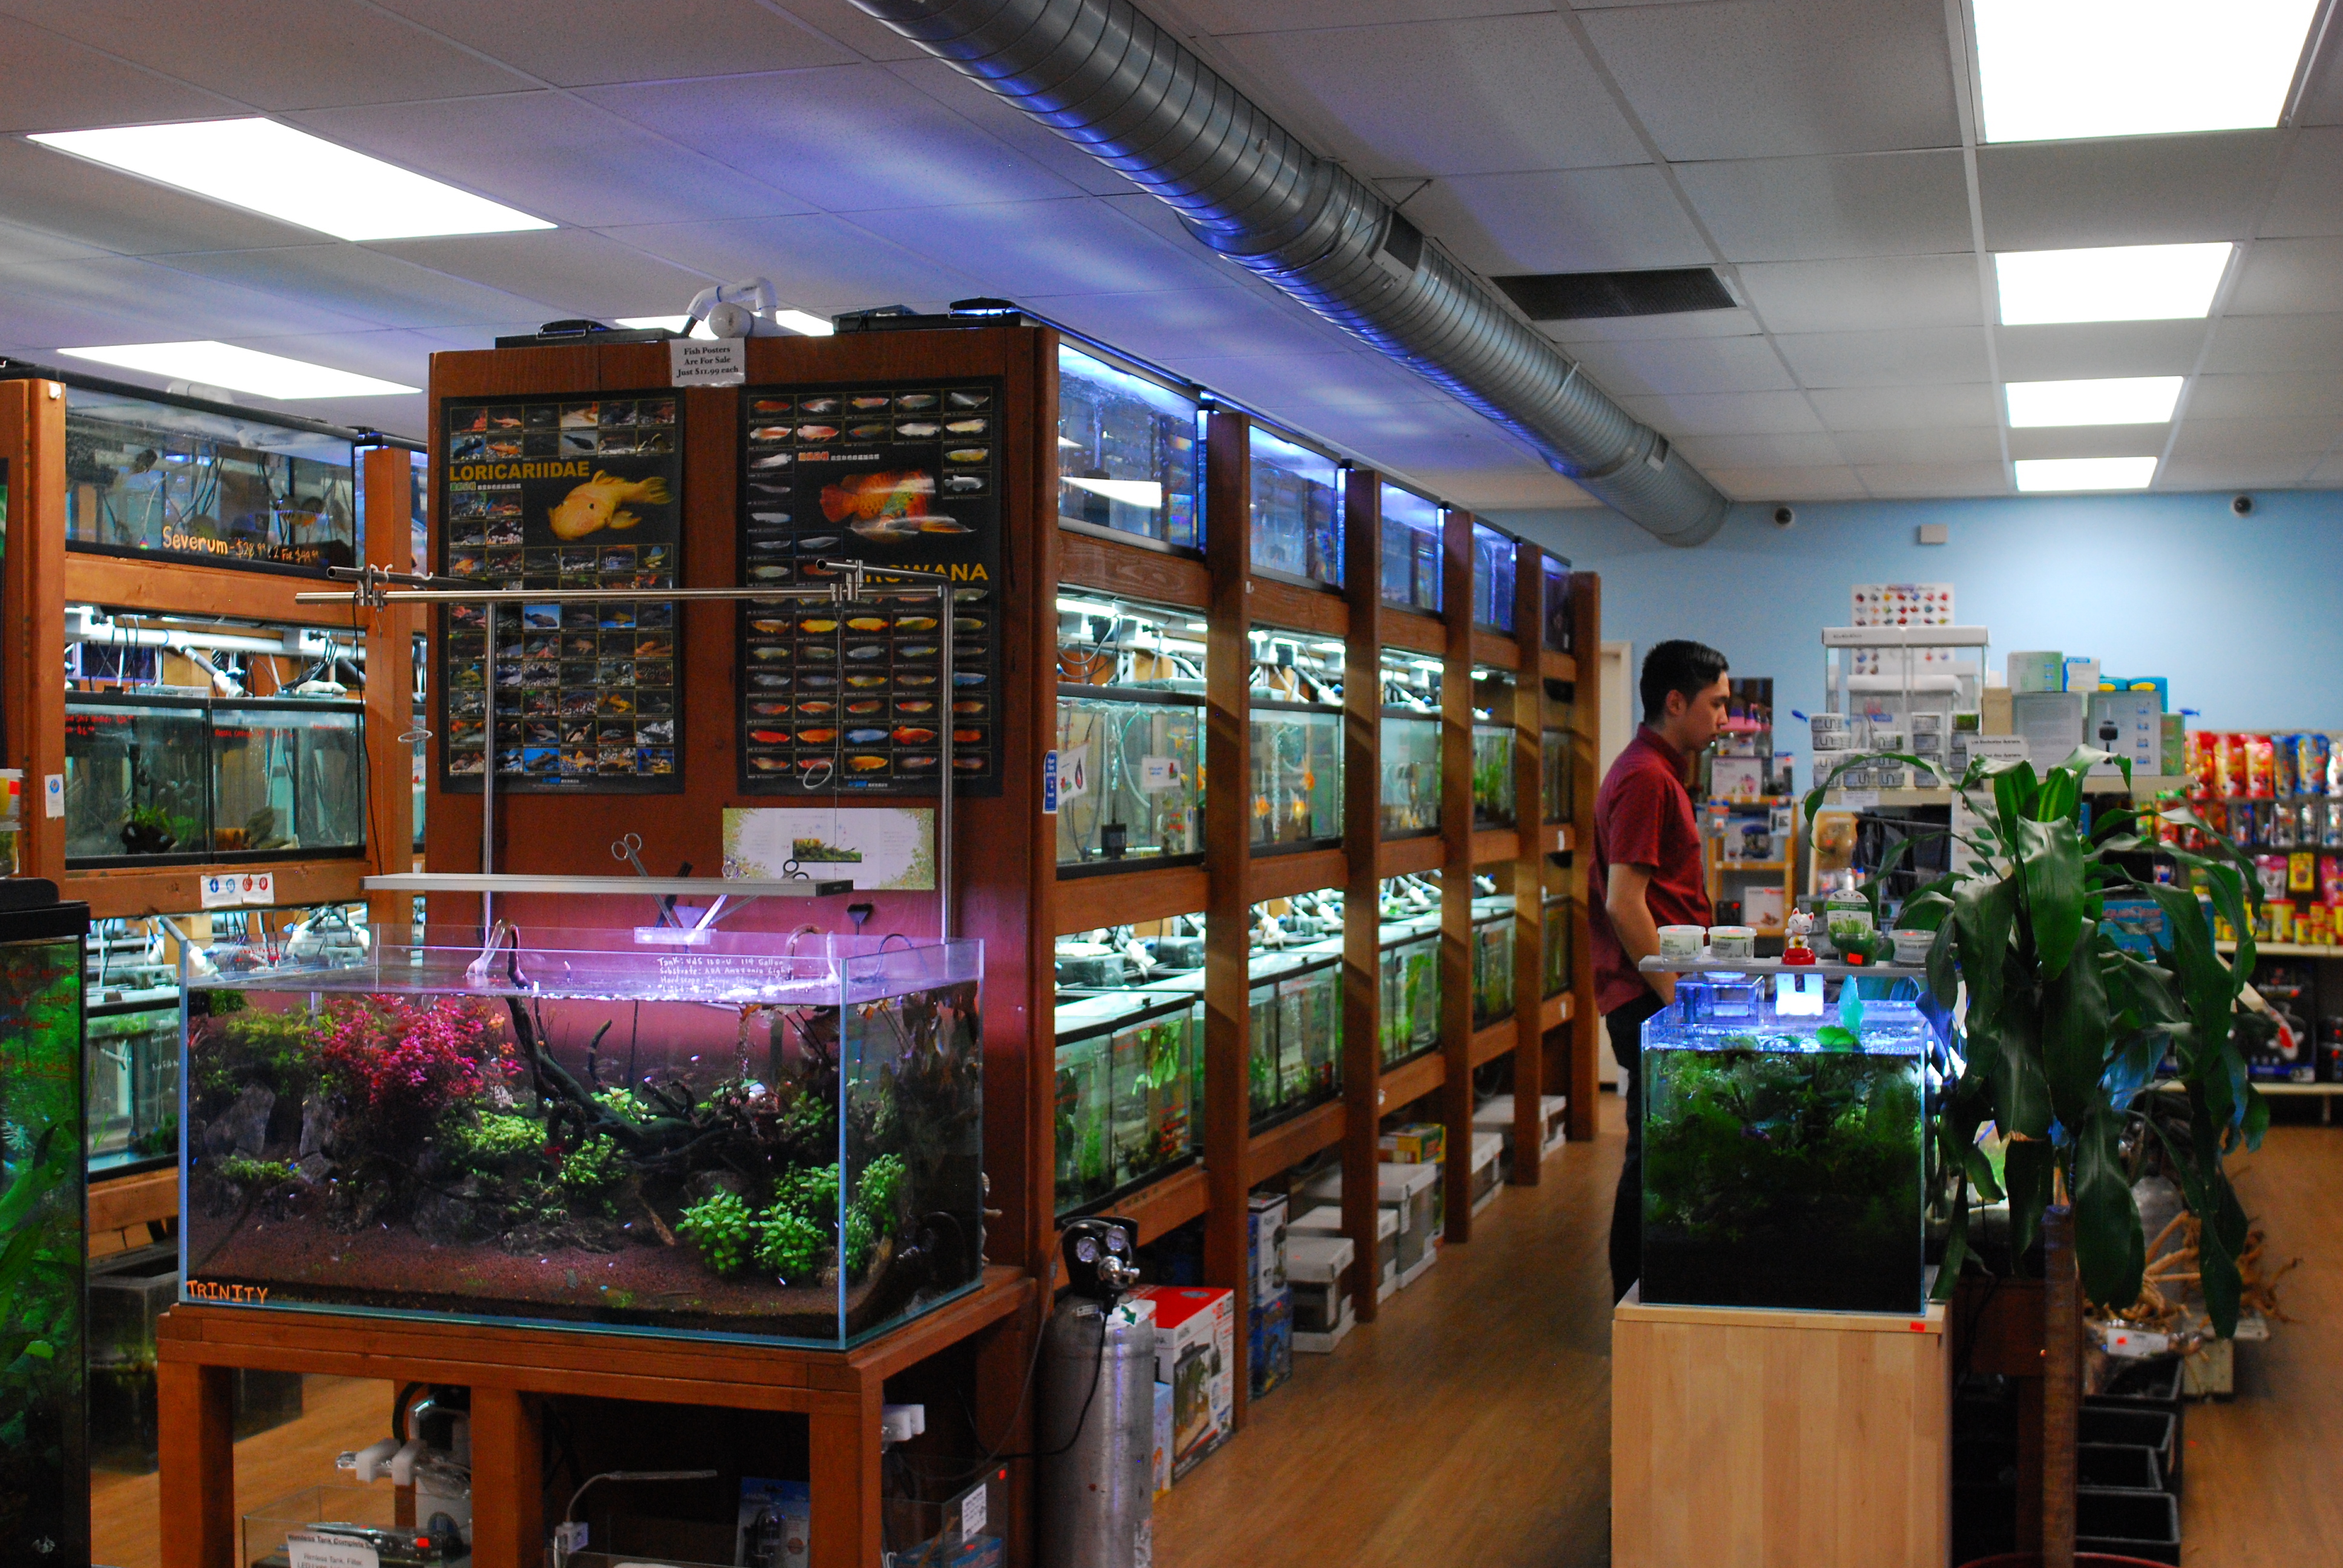 Pet Zone Convoy/Kearny Mesa is the go-to LFS for aquatic plants and freshwater tropical fish!